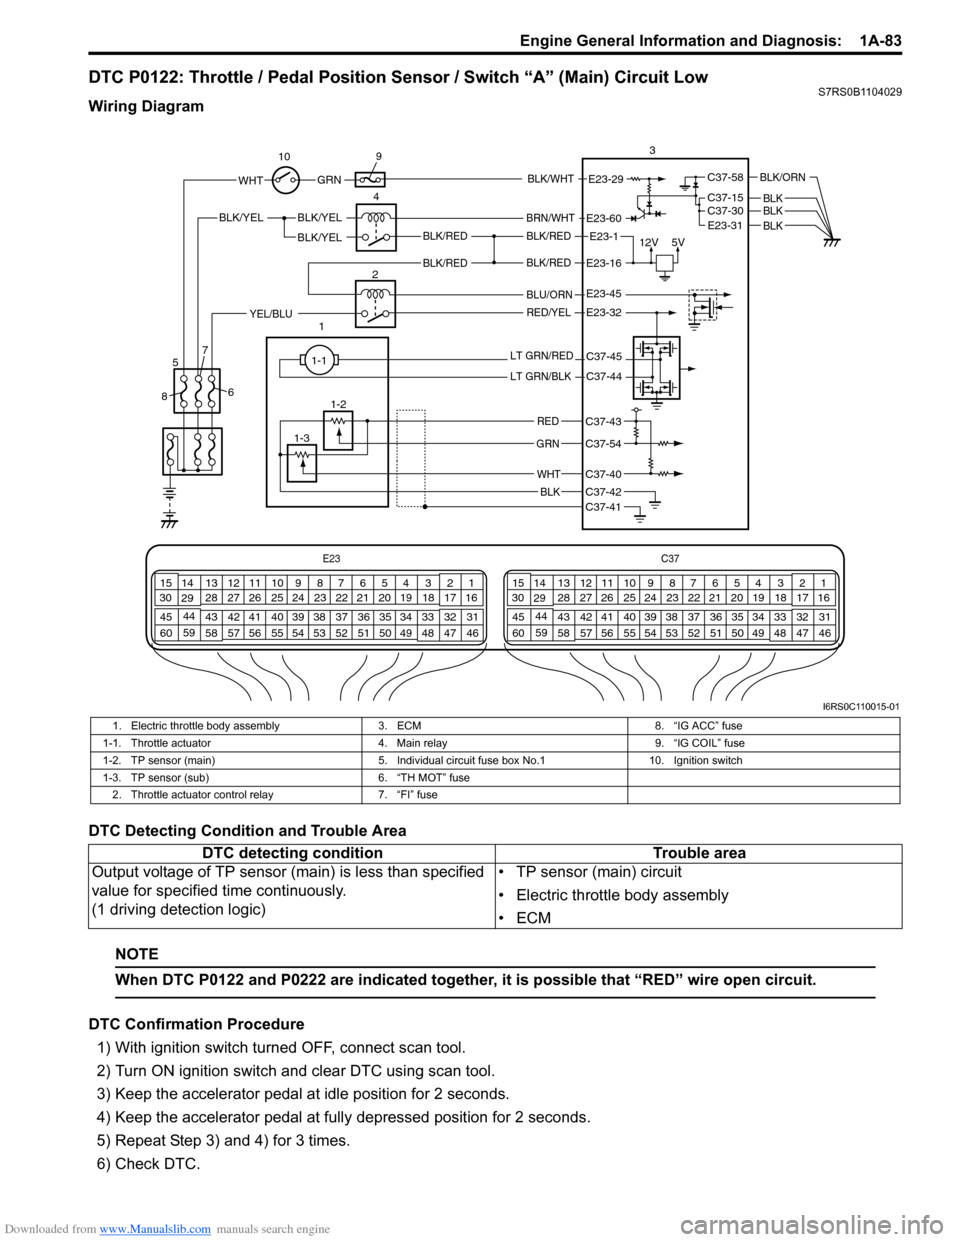 SUZUKI SWIFT 2008 2.G Service Workshop Manual Downloaded from www.Manualslib.com manuals search engine Engine General Information and Diagnosis:  1A-83
DTC P0122: Throttle / Pedal Position Sensor / Switch “A” (Main) Circuit LowS7RS0B1104029
W